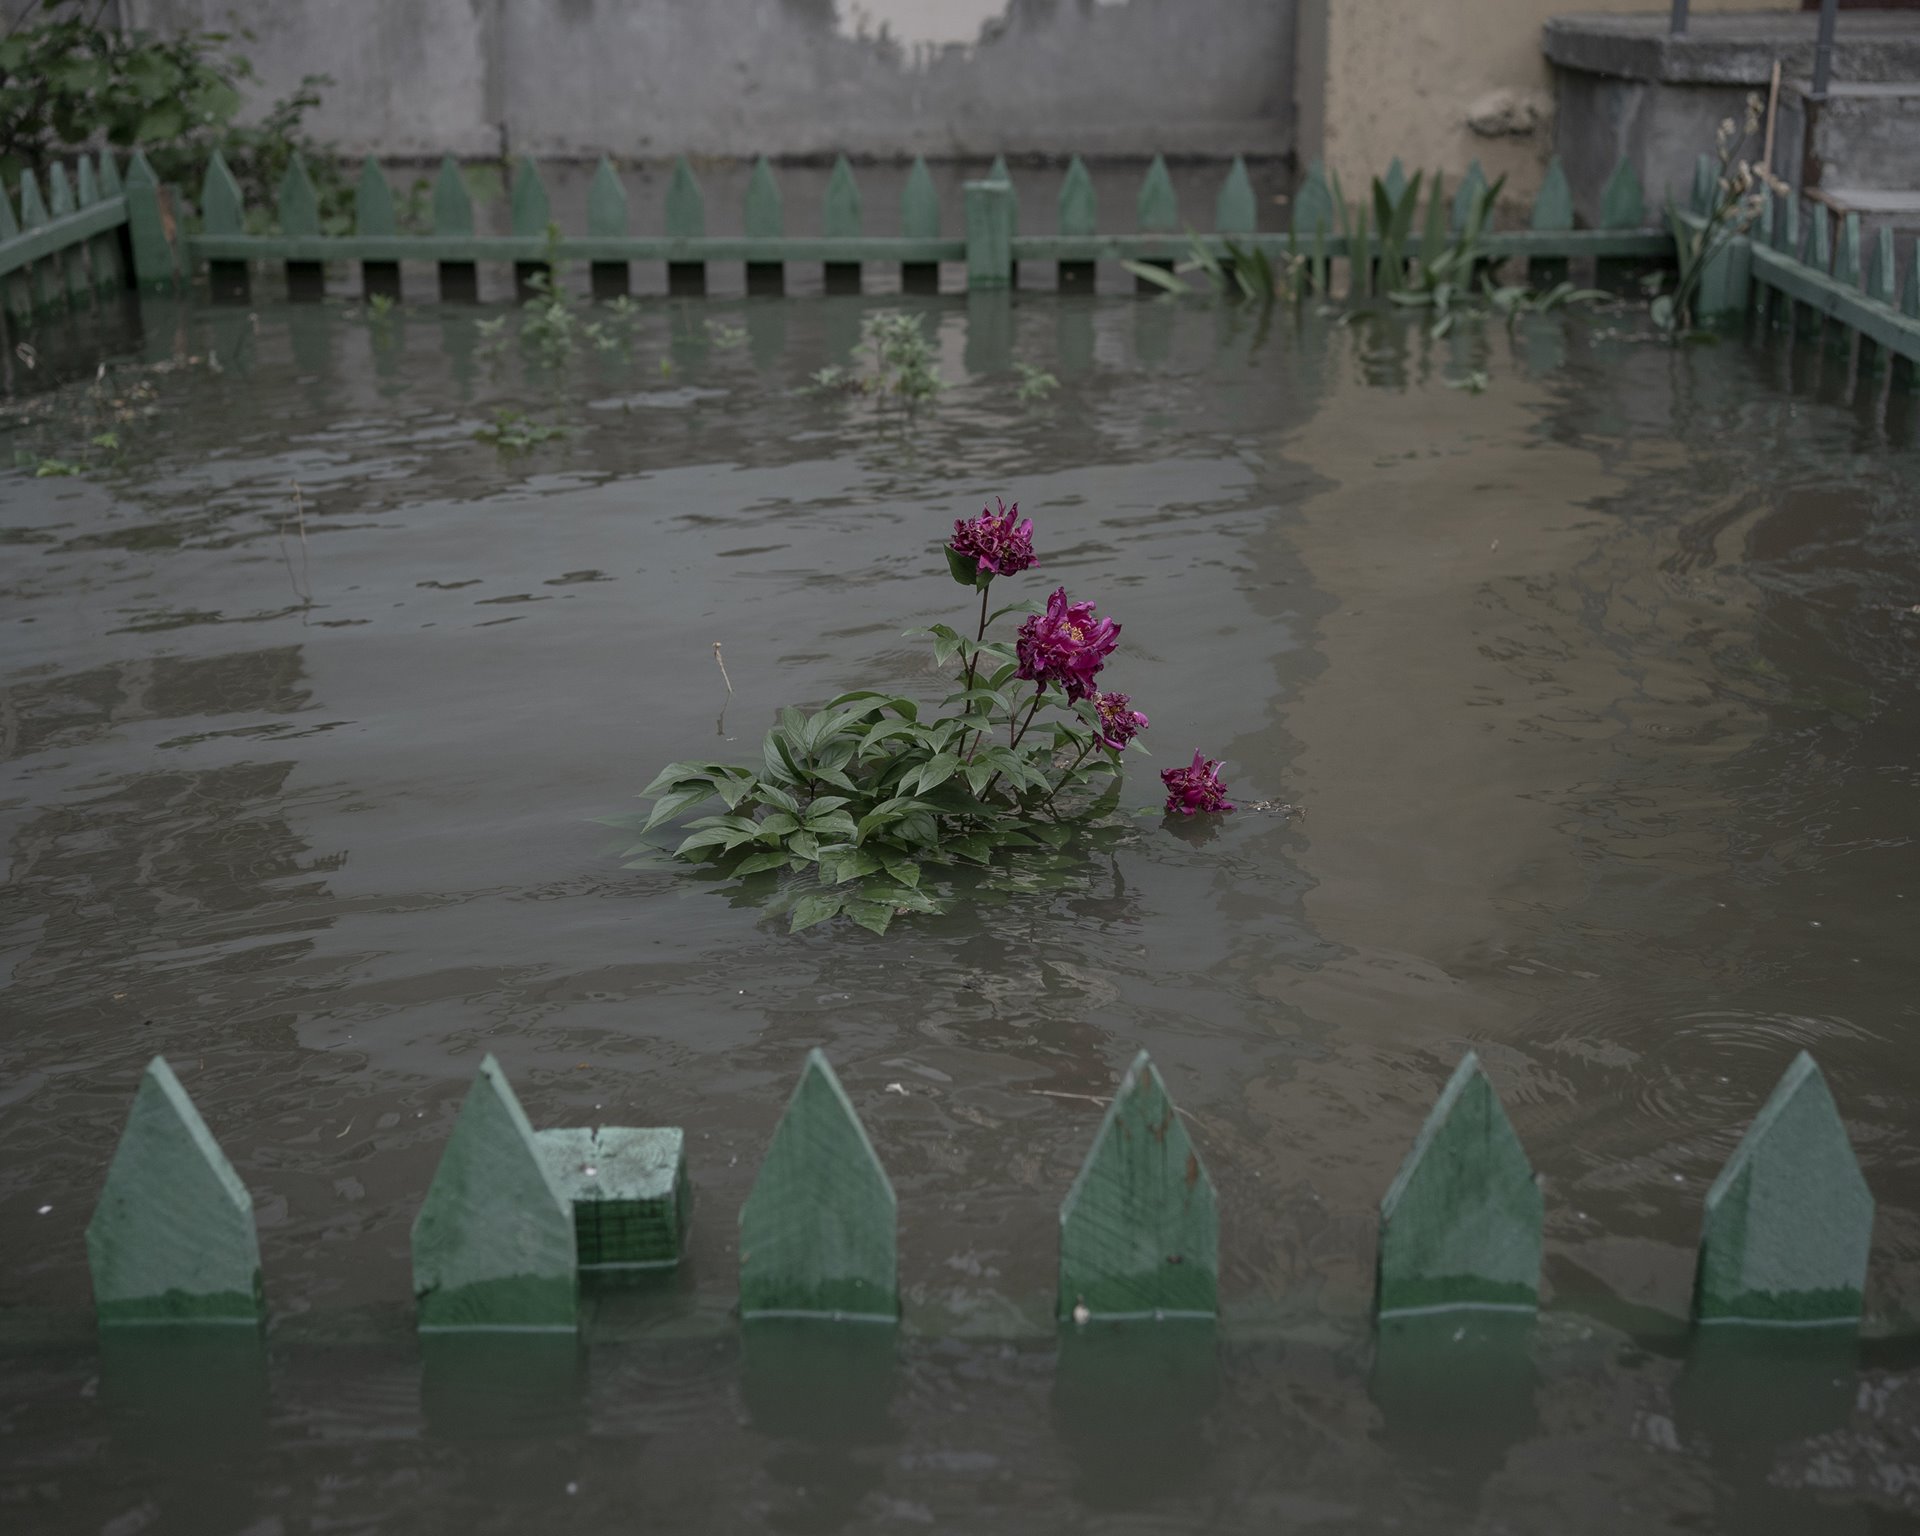 A peony bush submerged in floodwater on Korabel, an island in the Dnipro River in Kherson, Ukraine. Kherson&rsquo;s proximity to the front line hampered rebuilding efforts.